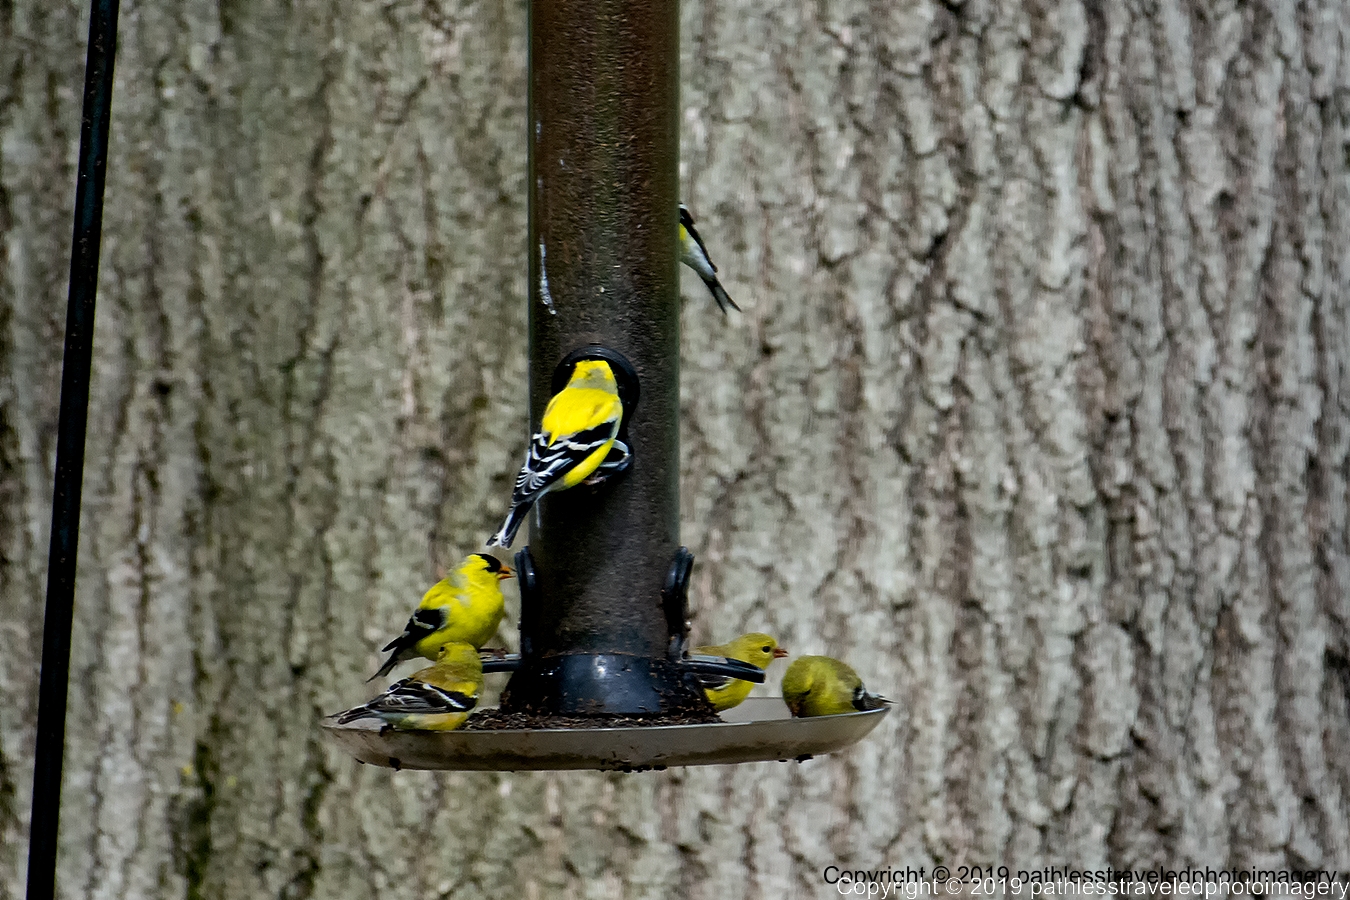 1904_0318a.jpg - A gathering of goldfinches